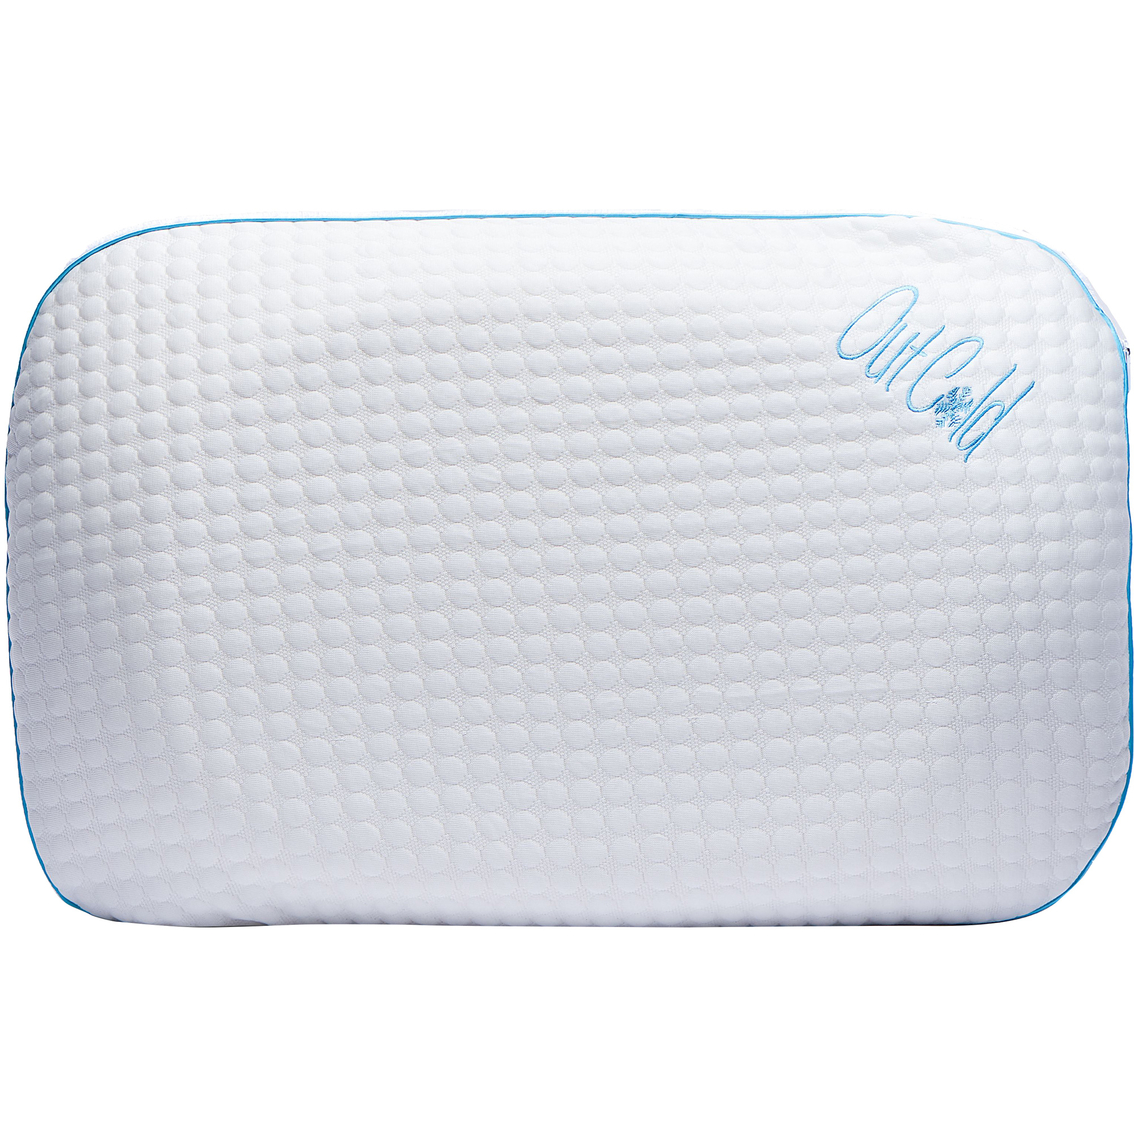 I love Pillow Out Cold Contour Pillow - Image 4 of 6